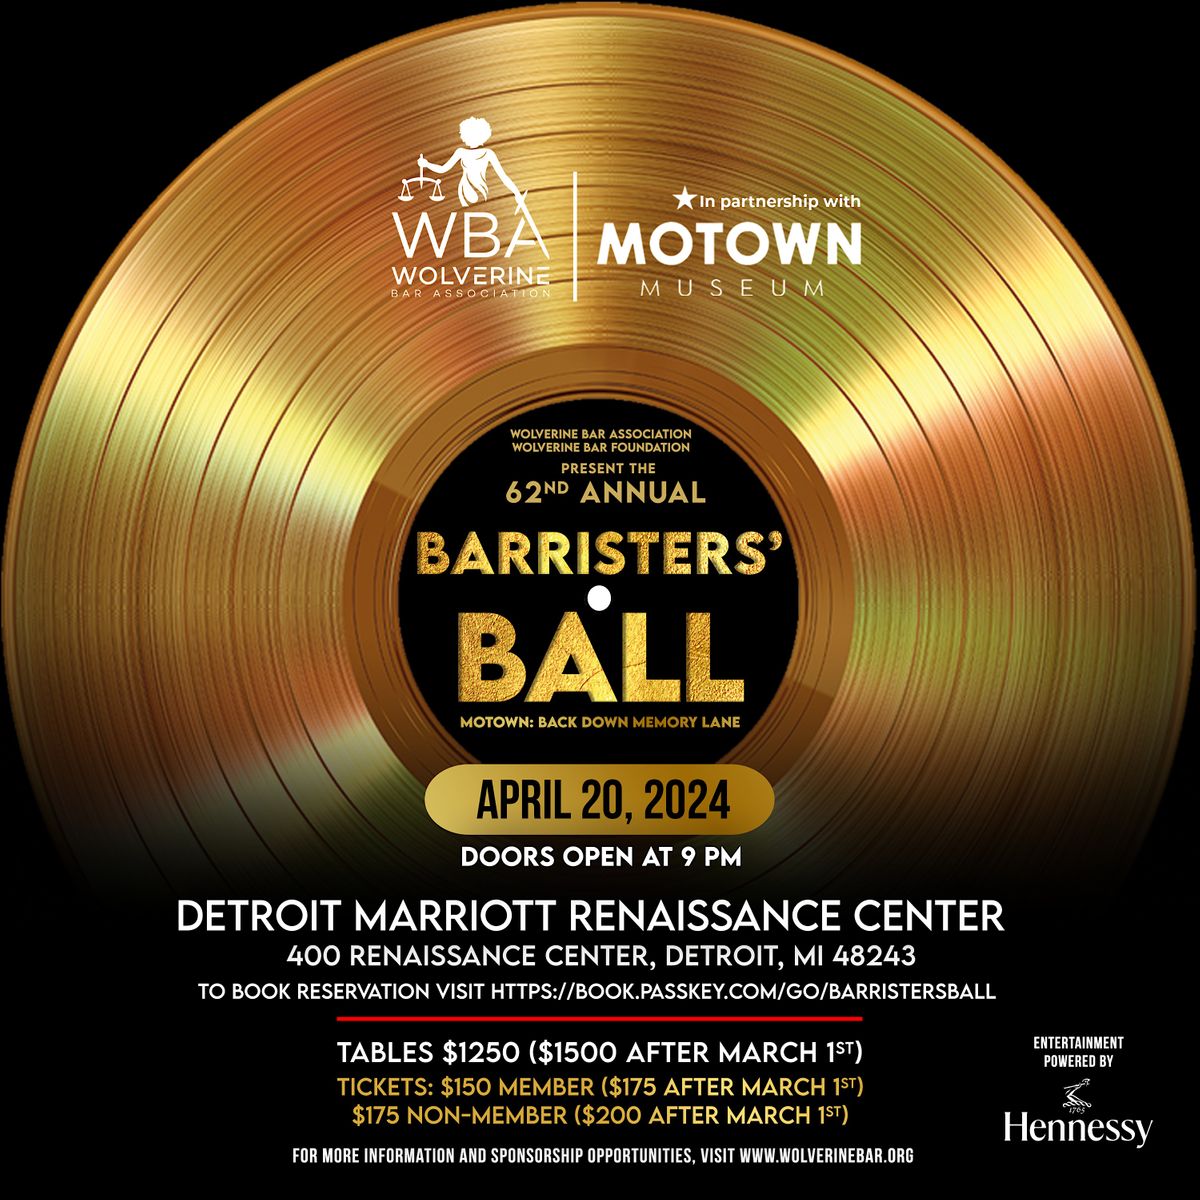 62nd Annual Barristers' Ball - Motown: Back Down Memory Lane